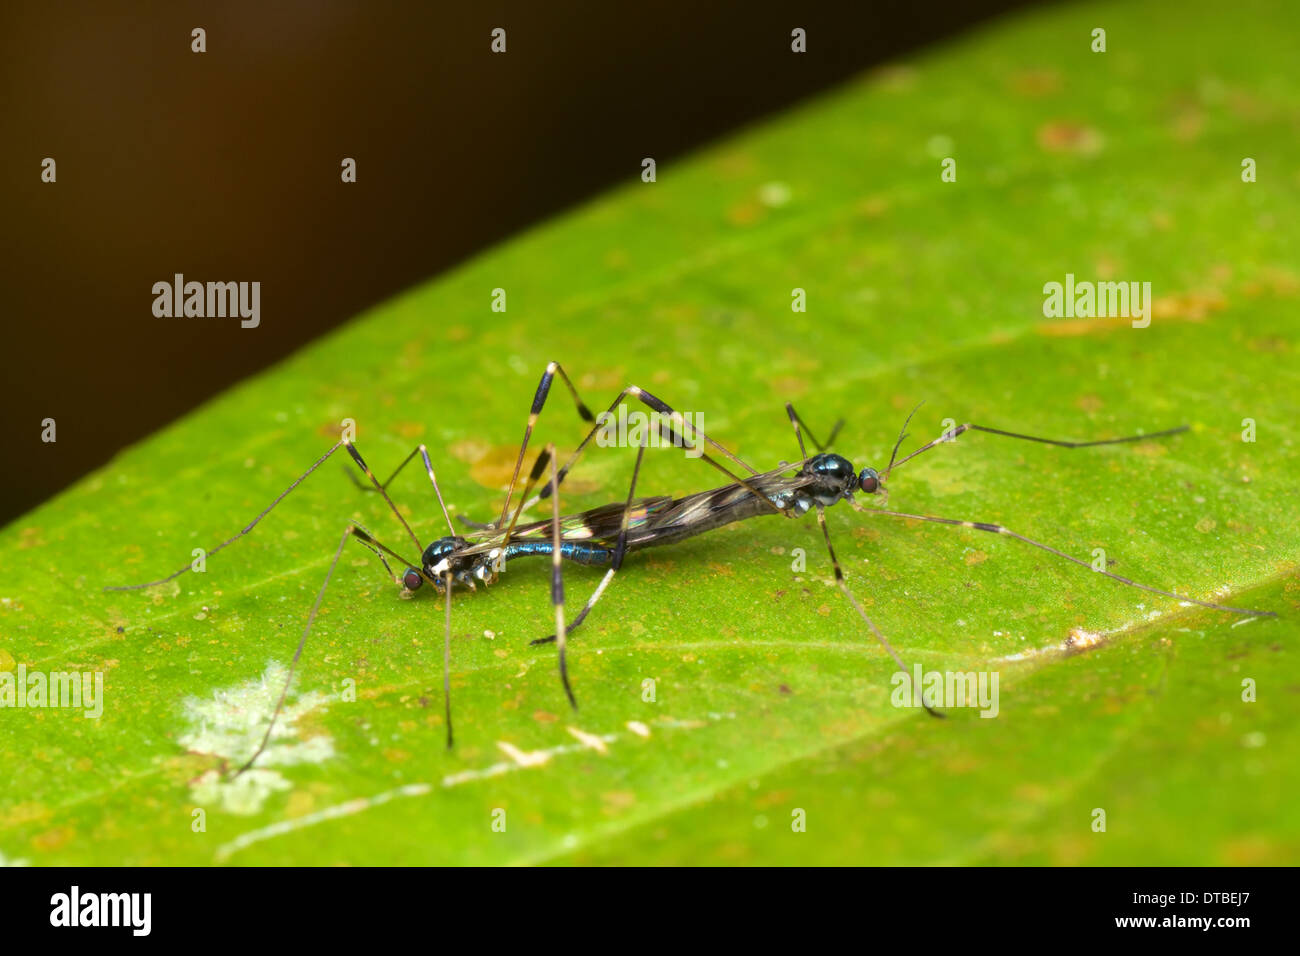 Tipulidae (crane flies) mating. A crane fly is a member of the family of insects in the order Diptera, the true flies. Stock Photo